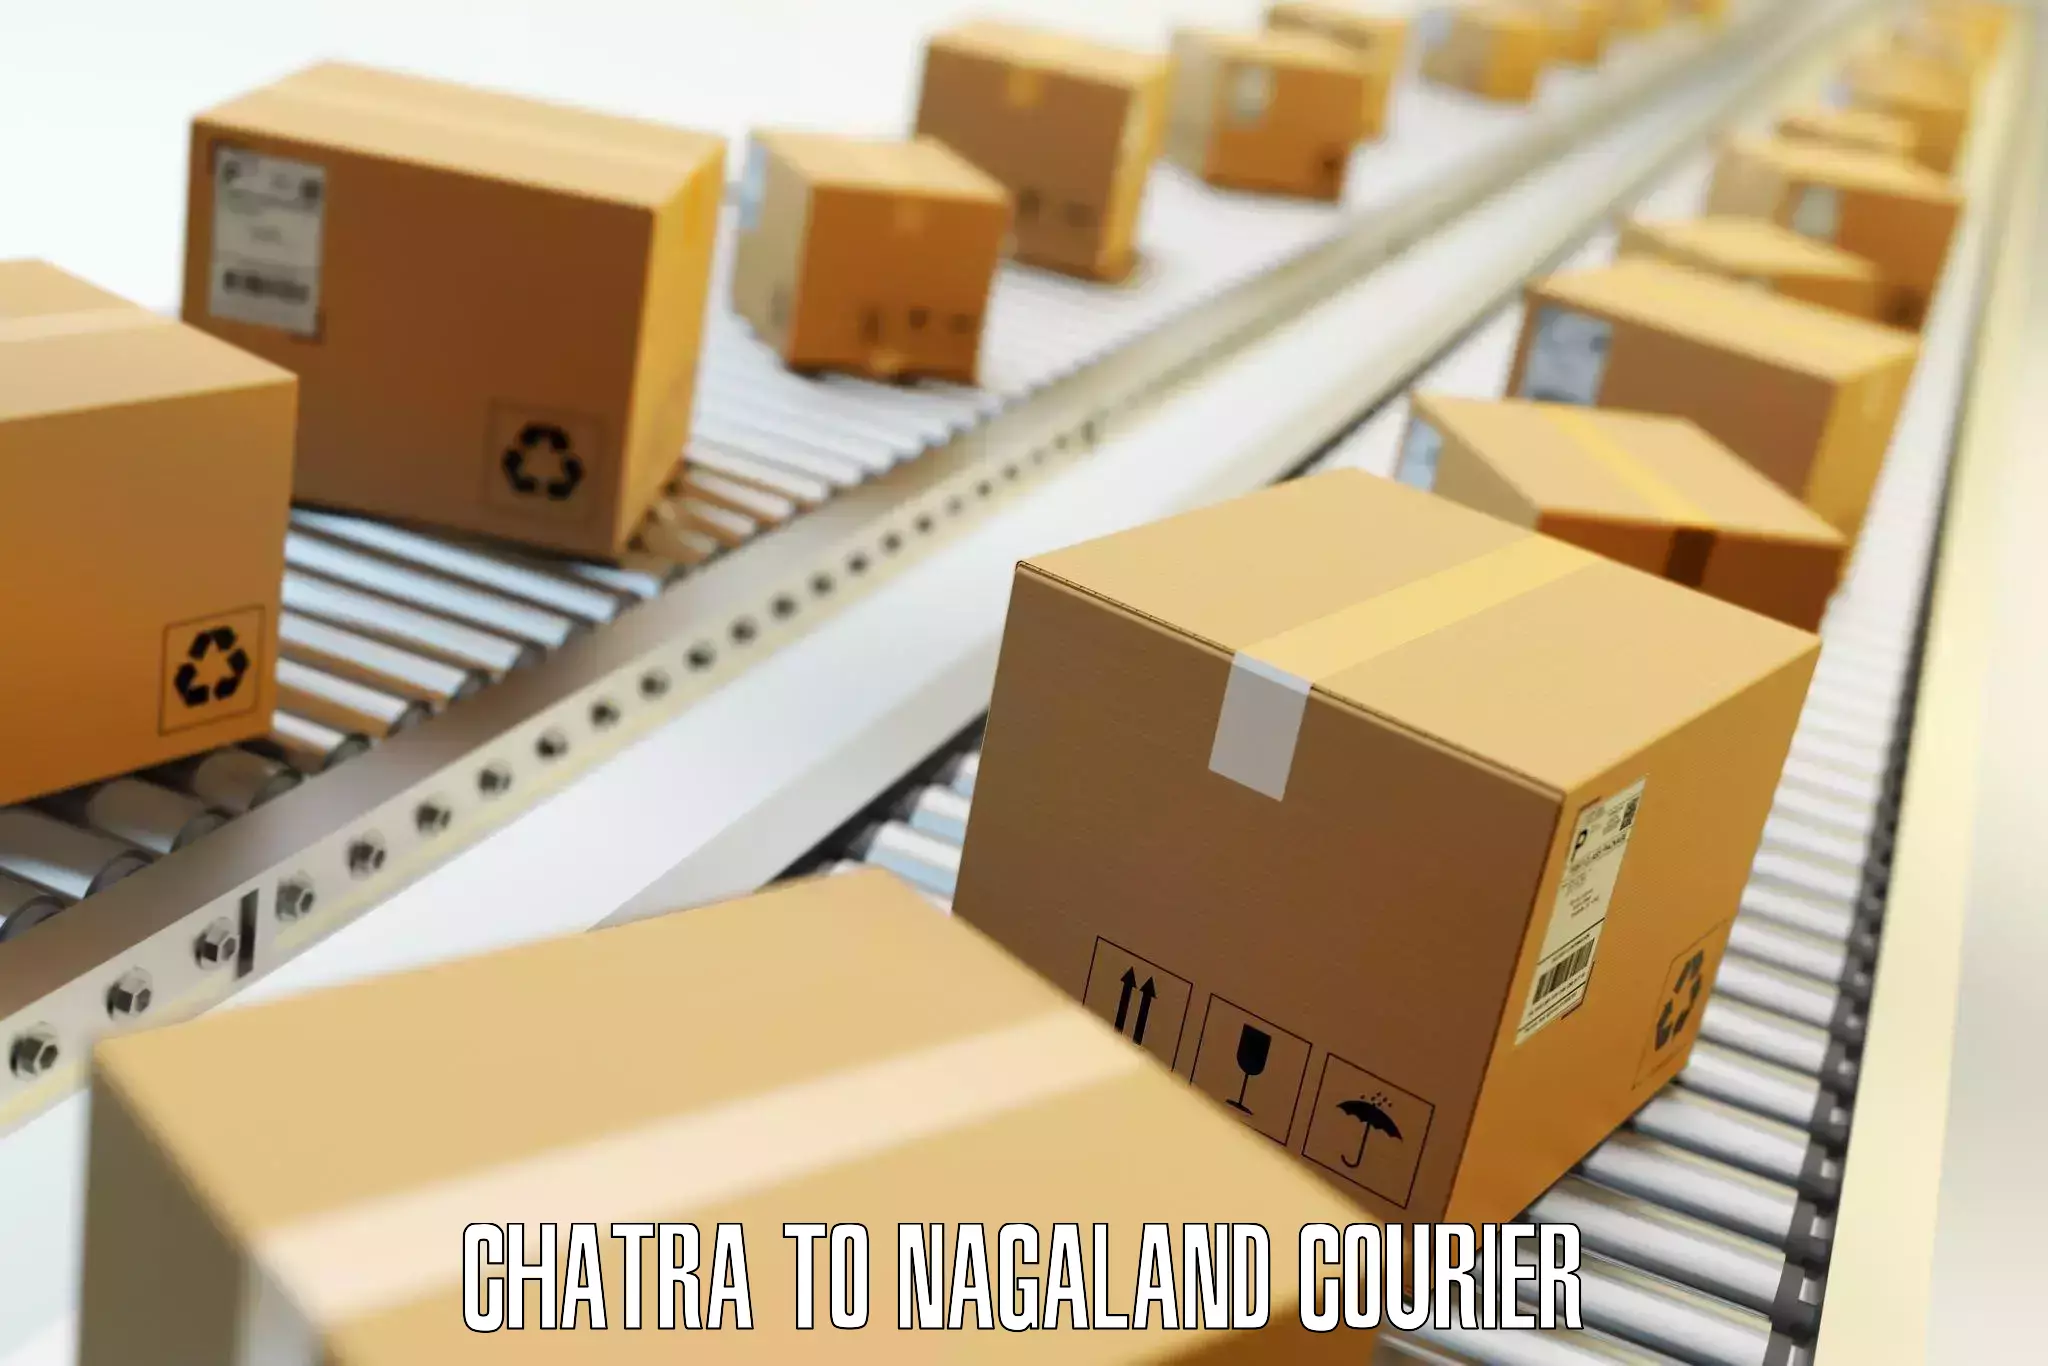 Luggage transport consultancy Chatra to Nagaland